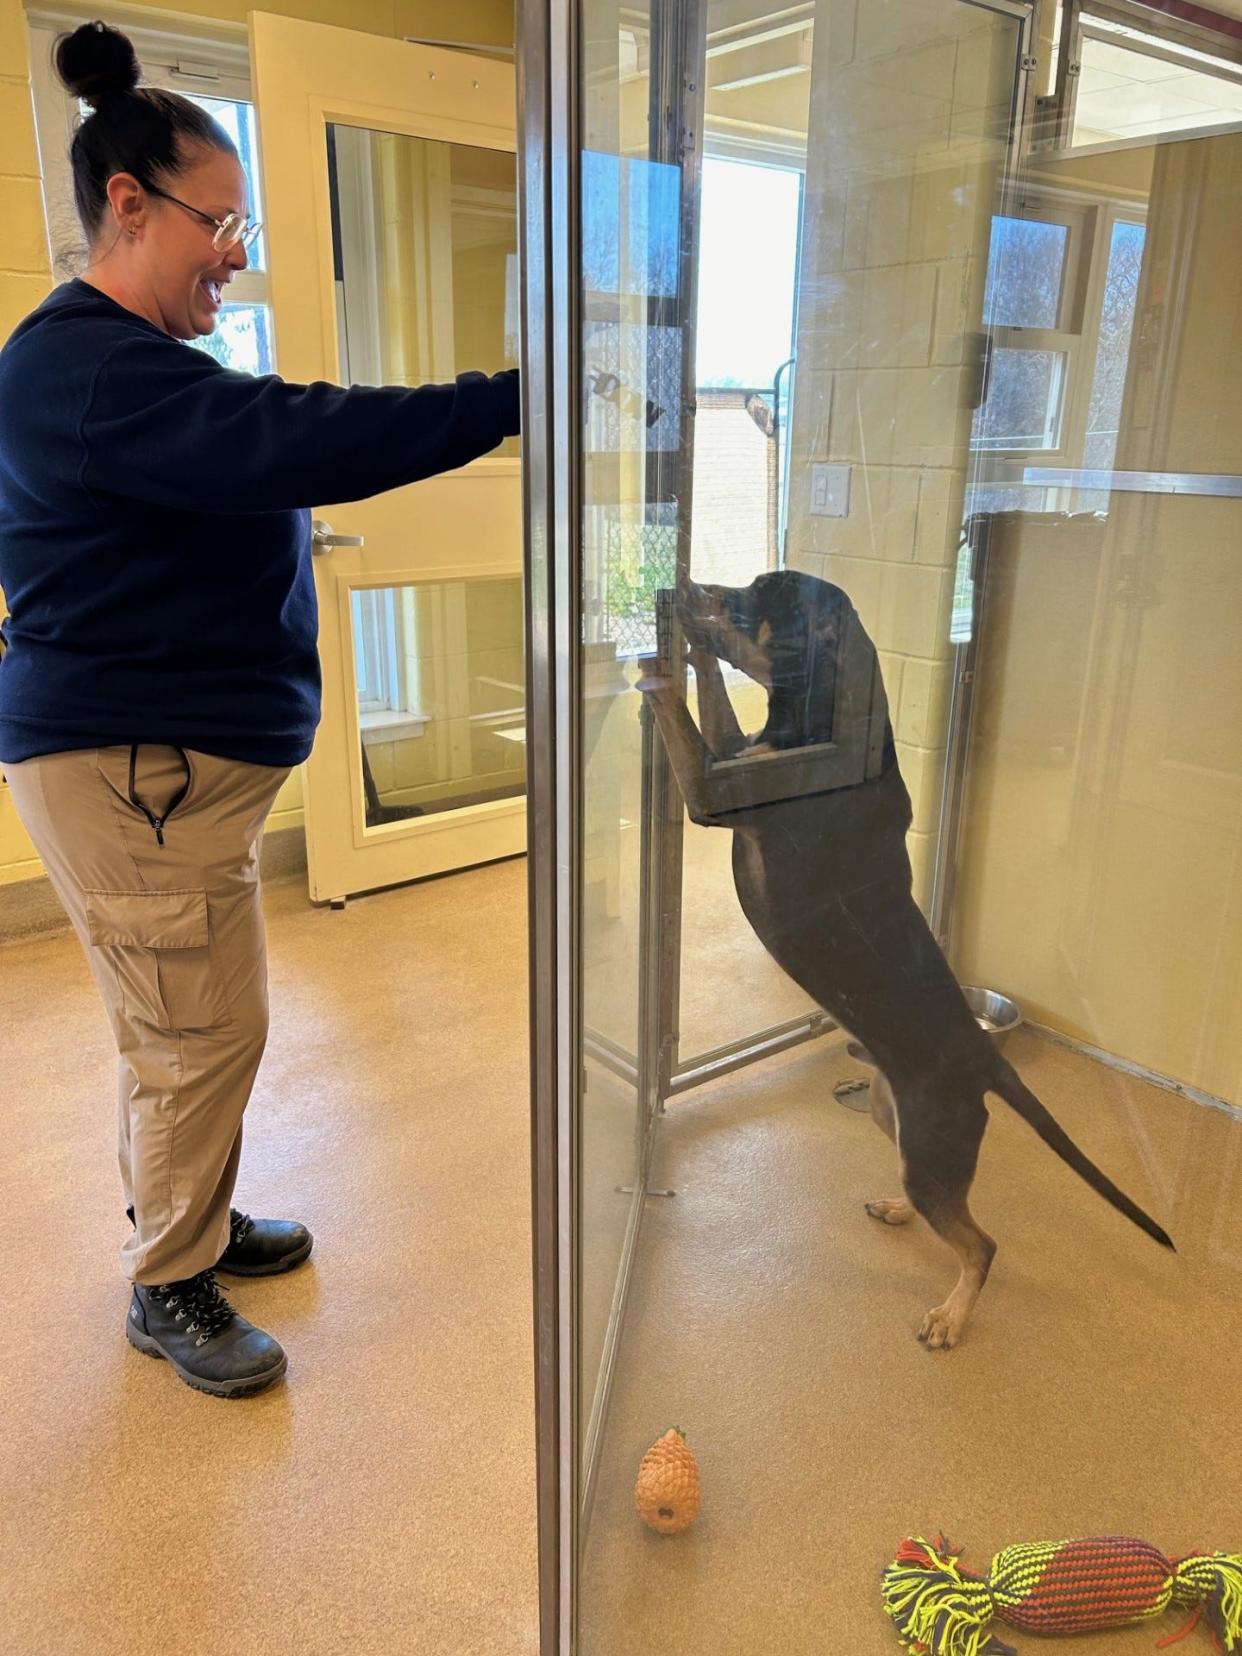 Patty Claus feeds a treat to Carlos, an adoptable dog at the Toms River animal shelter.